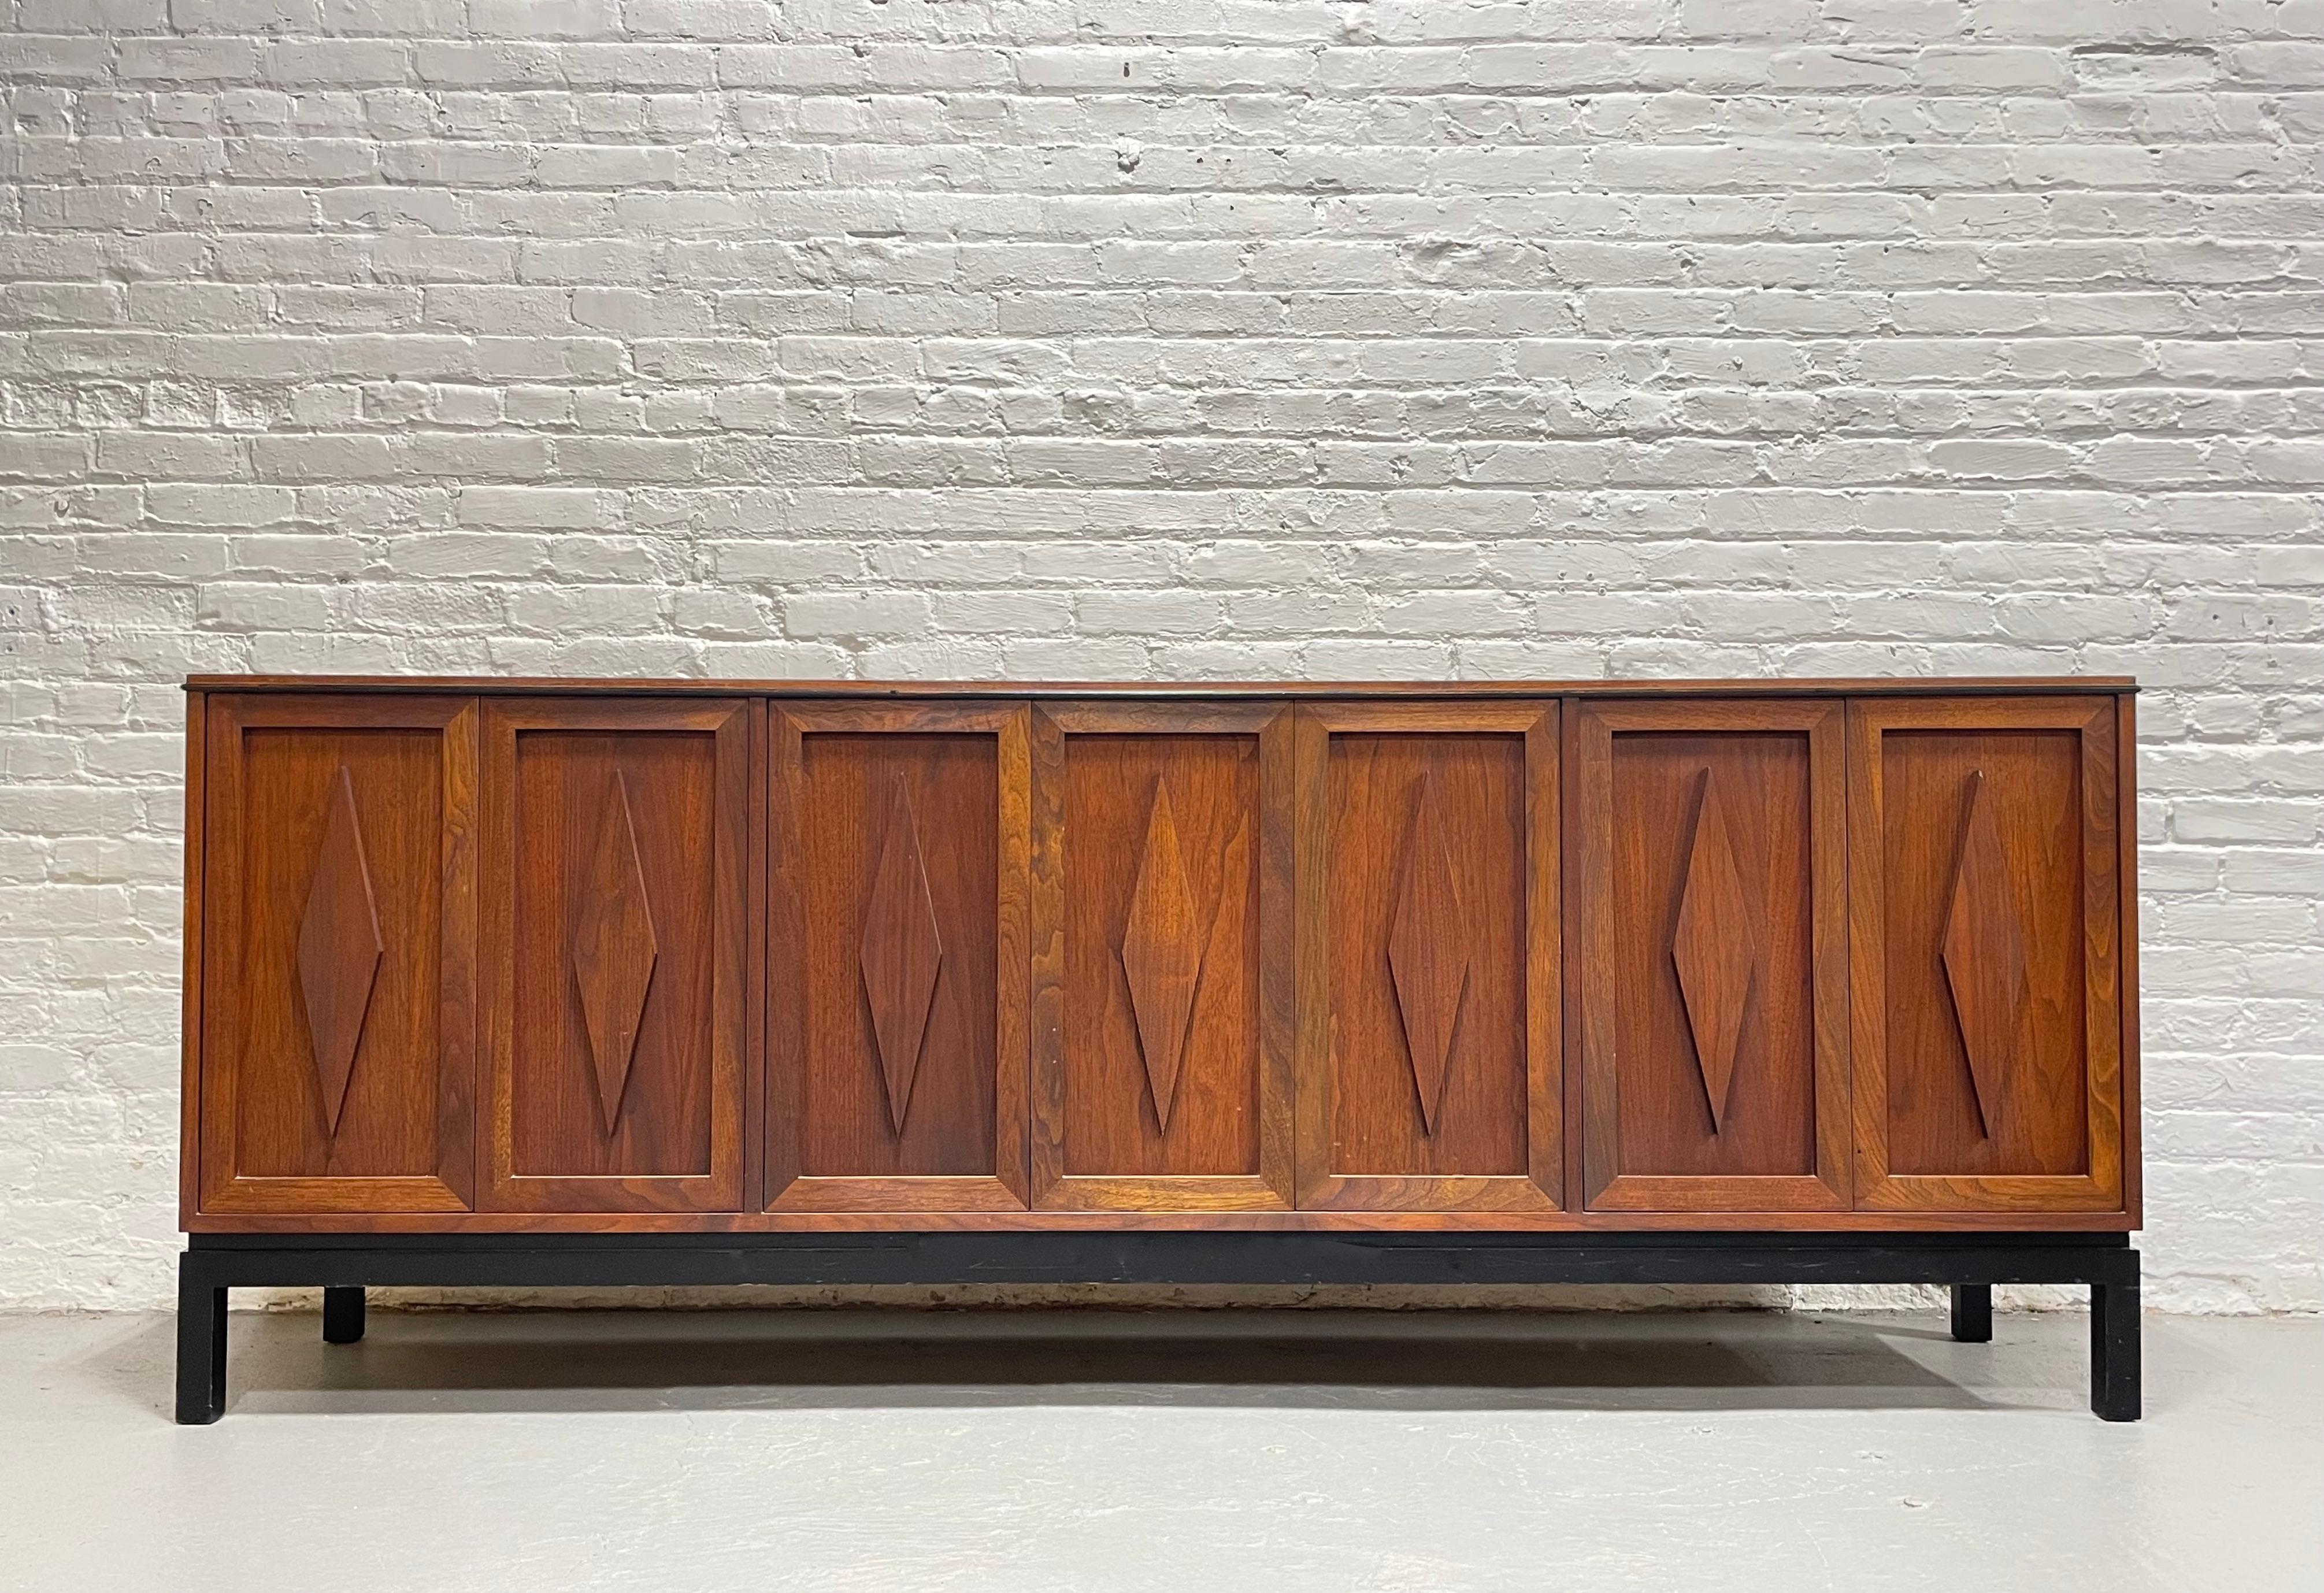 Extra long Mid Century Modern Walnut credenza / media stand offering a wealth of storage and the most stunning diamond pattern across the facade. This beautifully crafted piece is perfect as a media stand with plenty of interior adjustable or